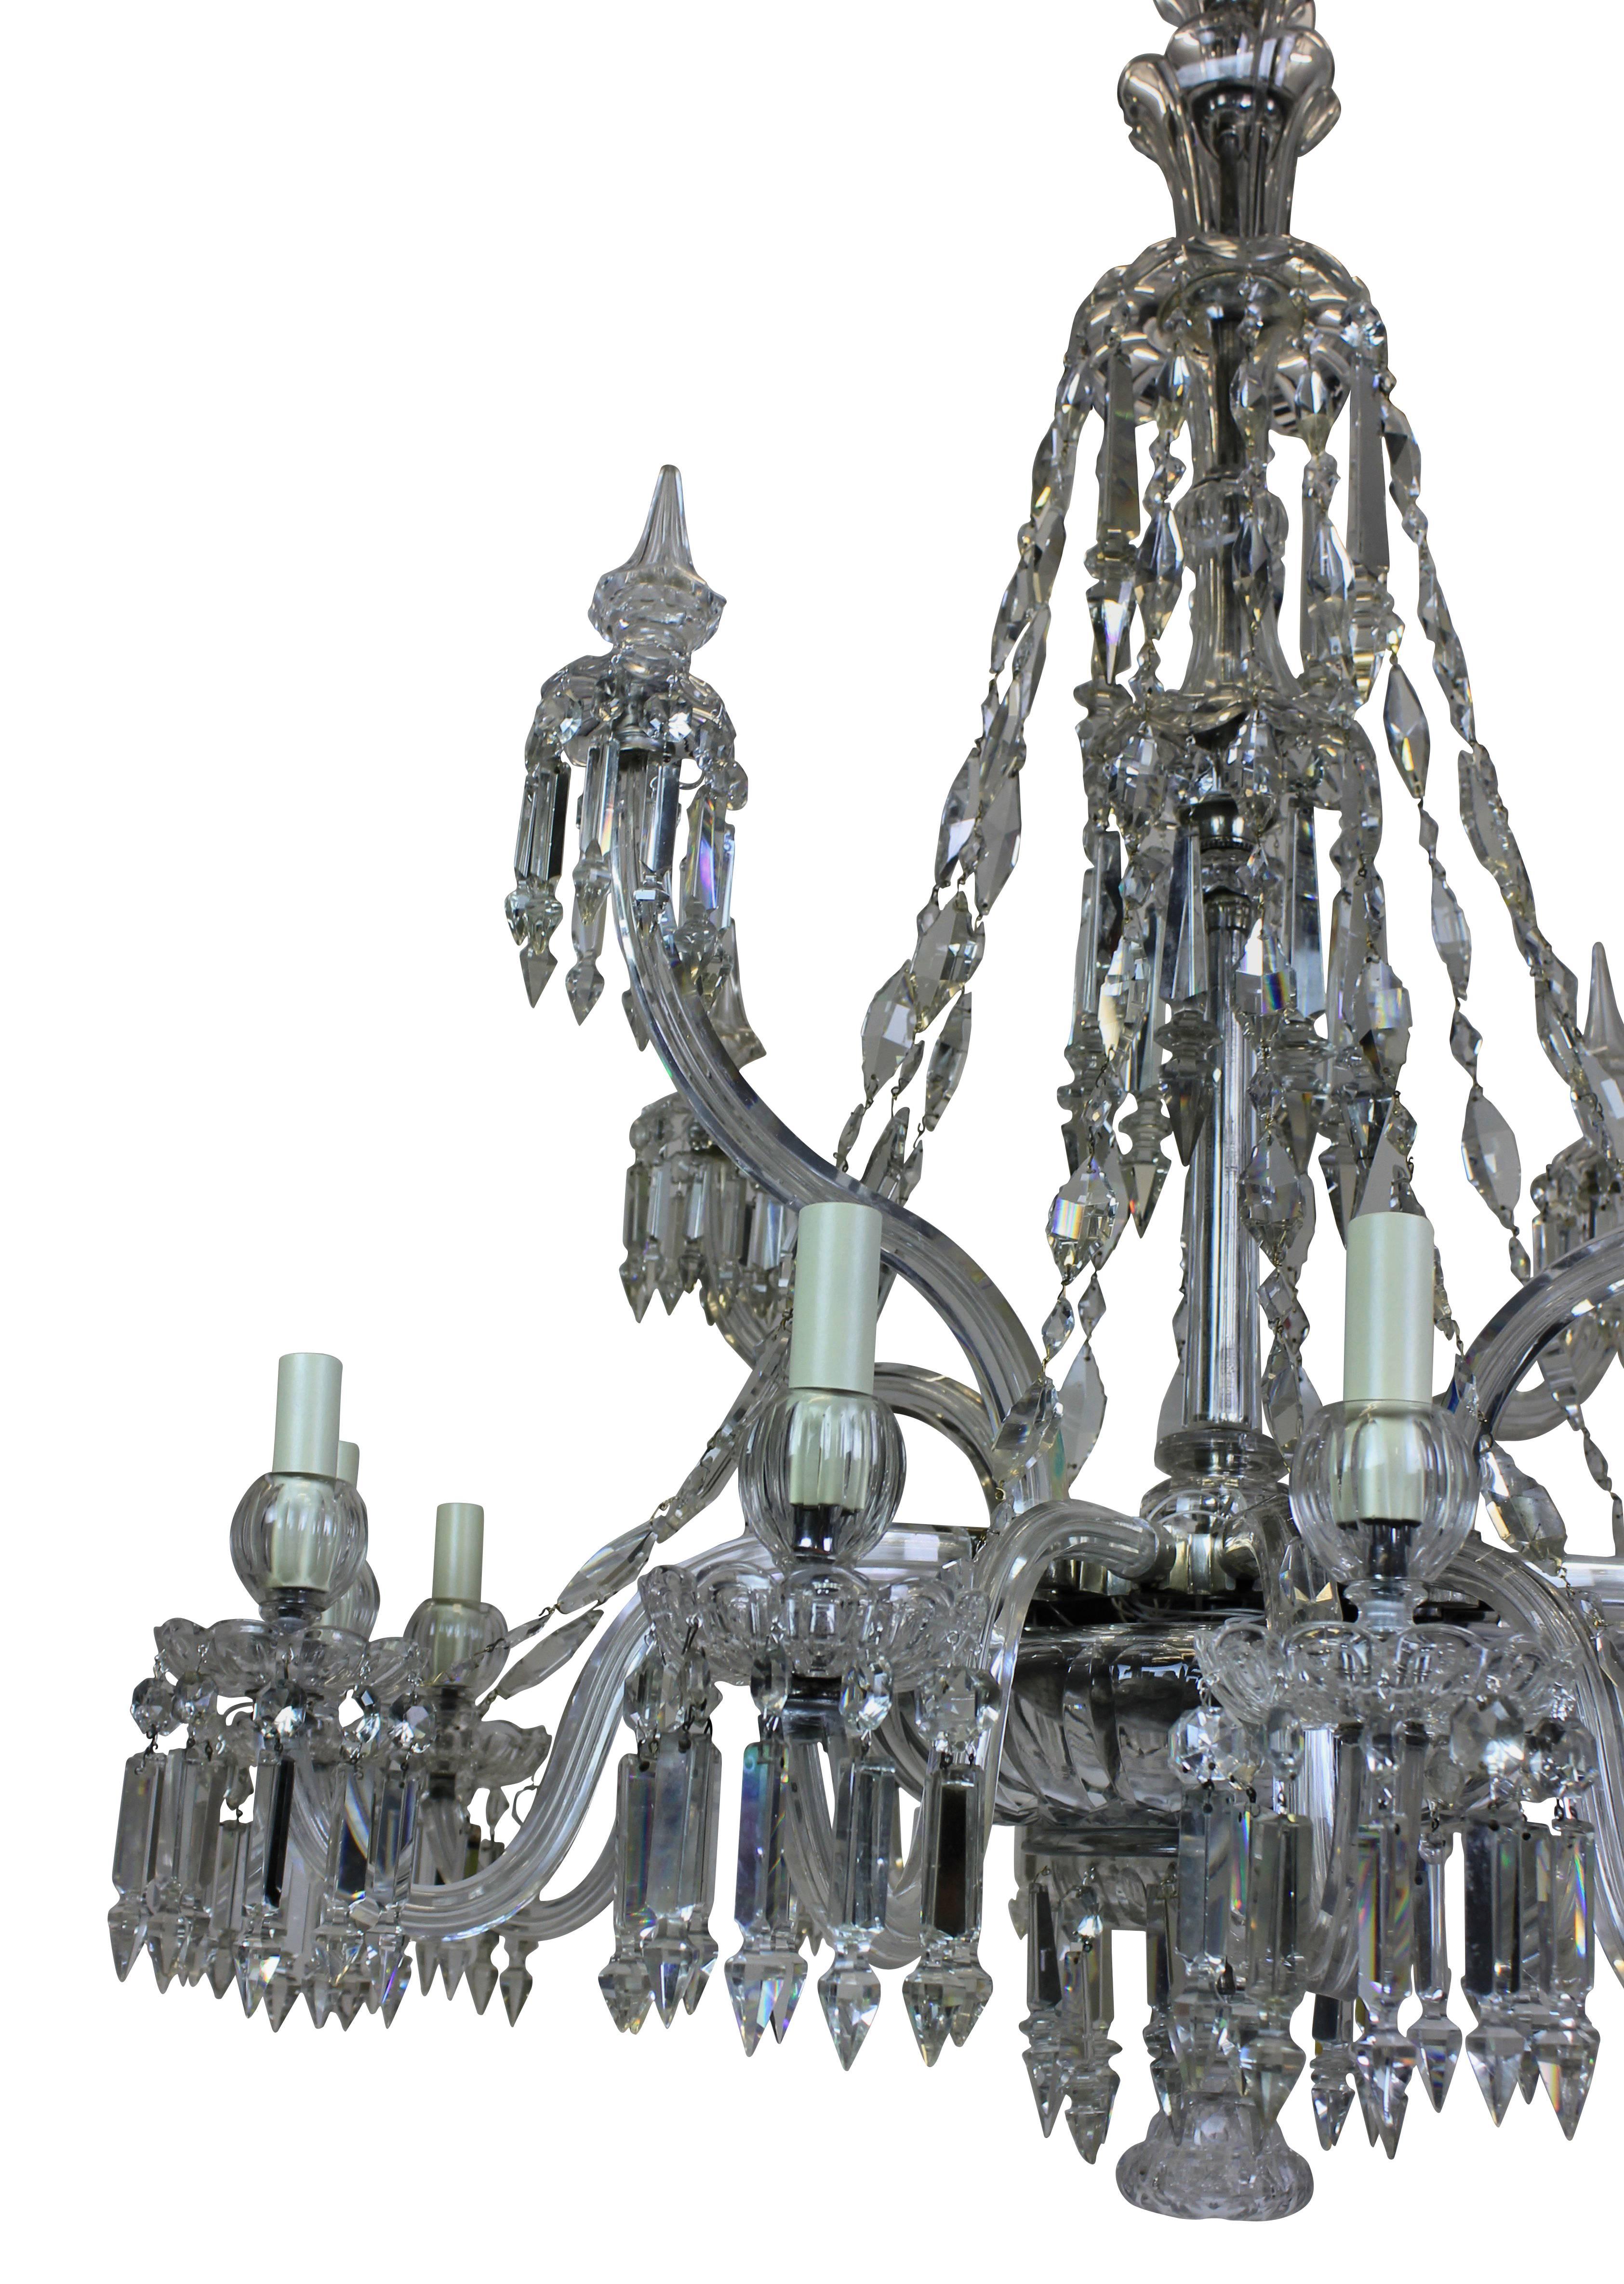 A fine English cut-glass chandelier by F & C Osler. Formerly a gasolier. With twelve arms hung throughout and four large up-swept arms with spikes. The chains of diamond shape are a unique Osler pattern.
 